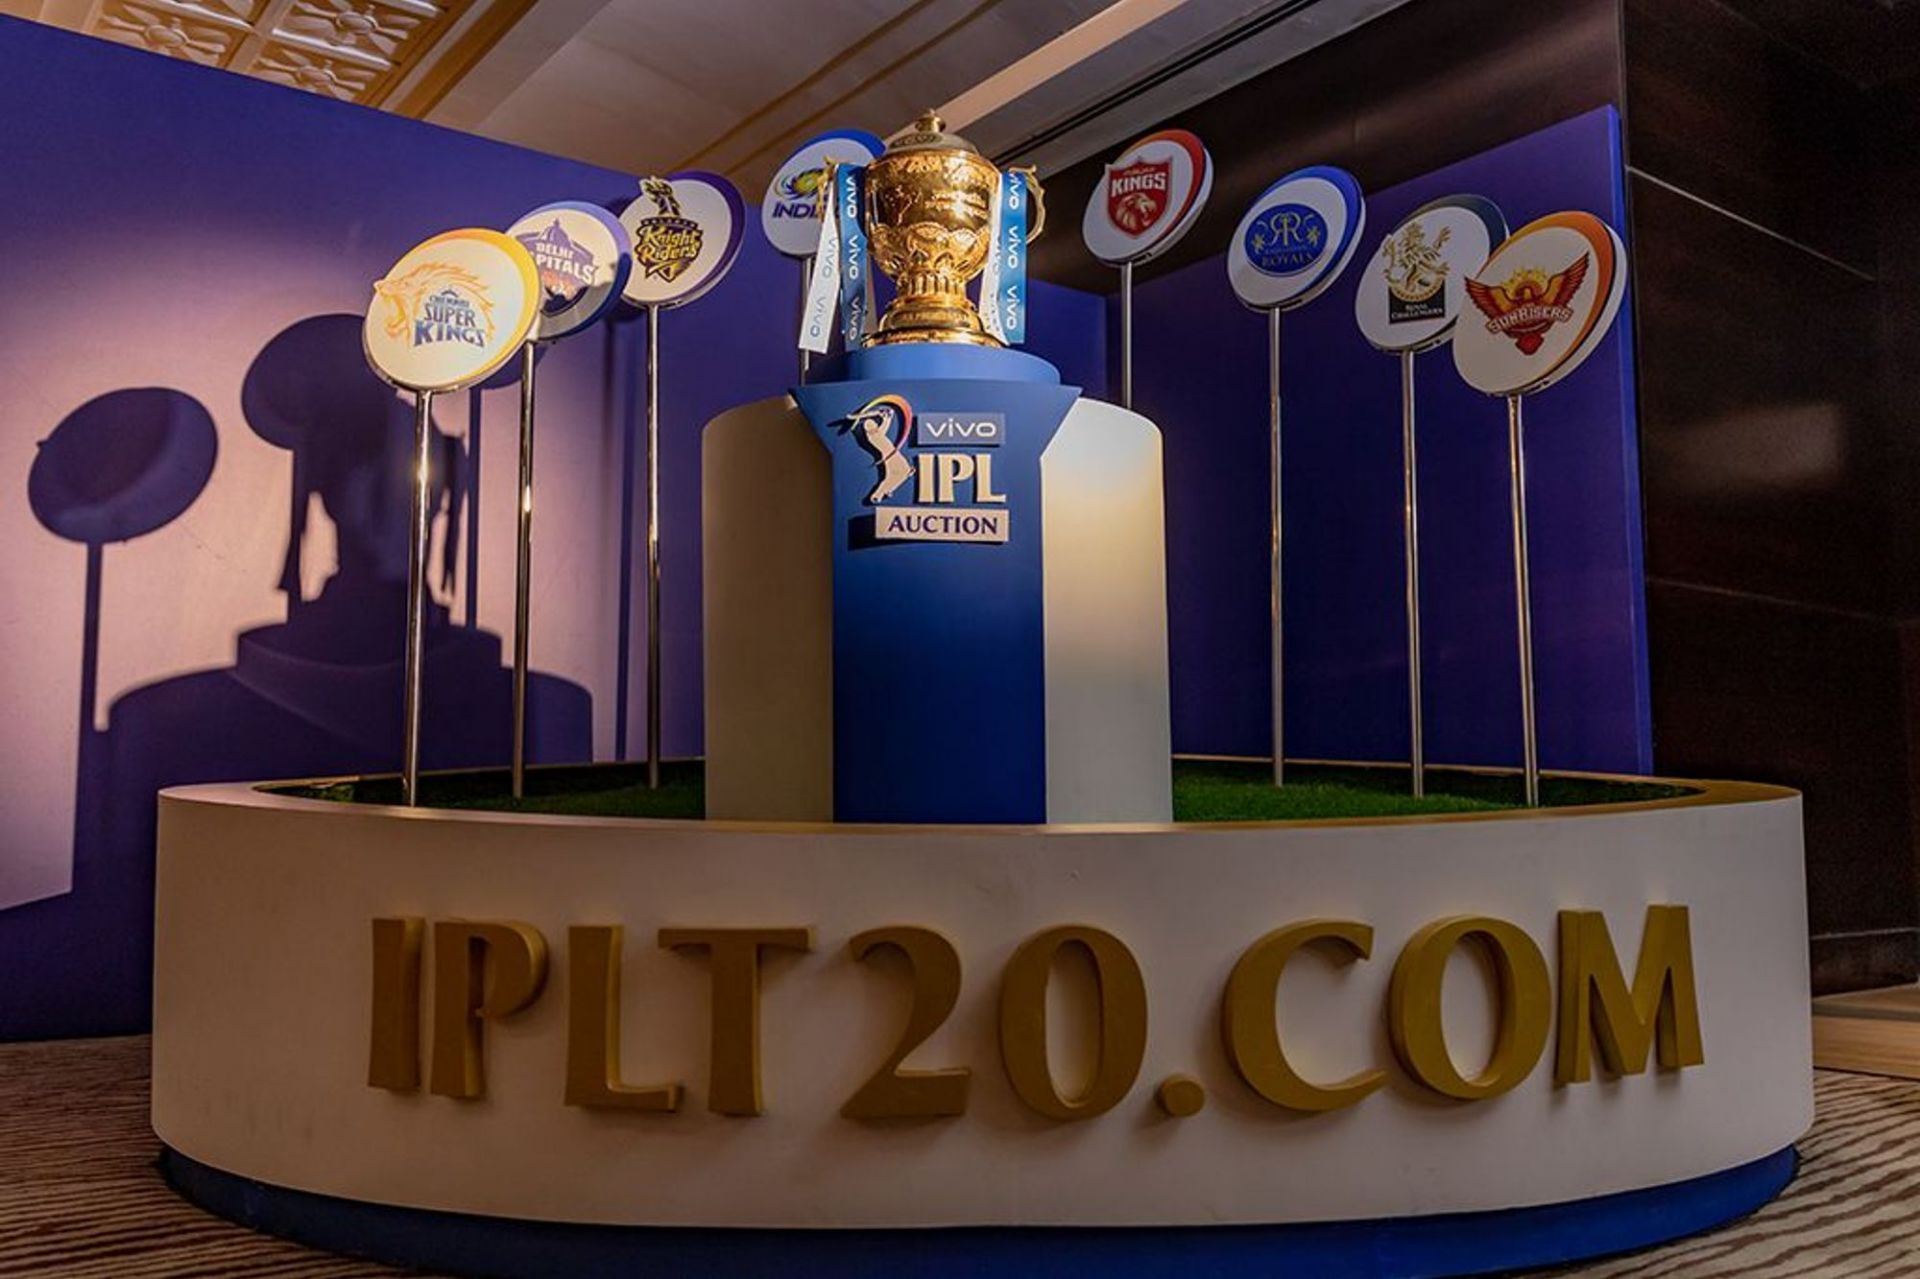 Two new teams will join the existing eight franchises in IPL 2022 (Image Courtesy: IPLT20.com)